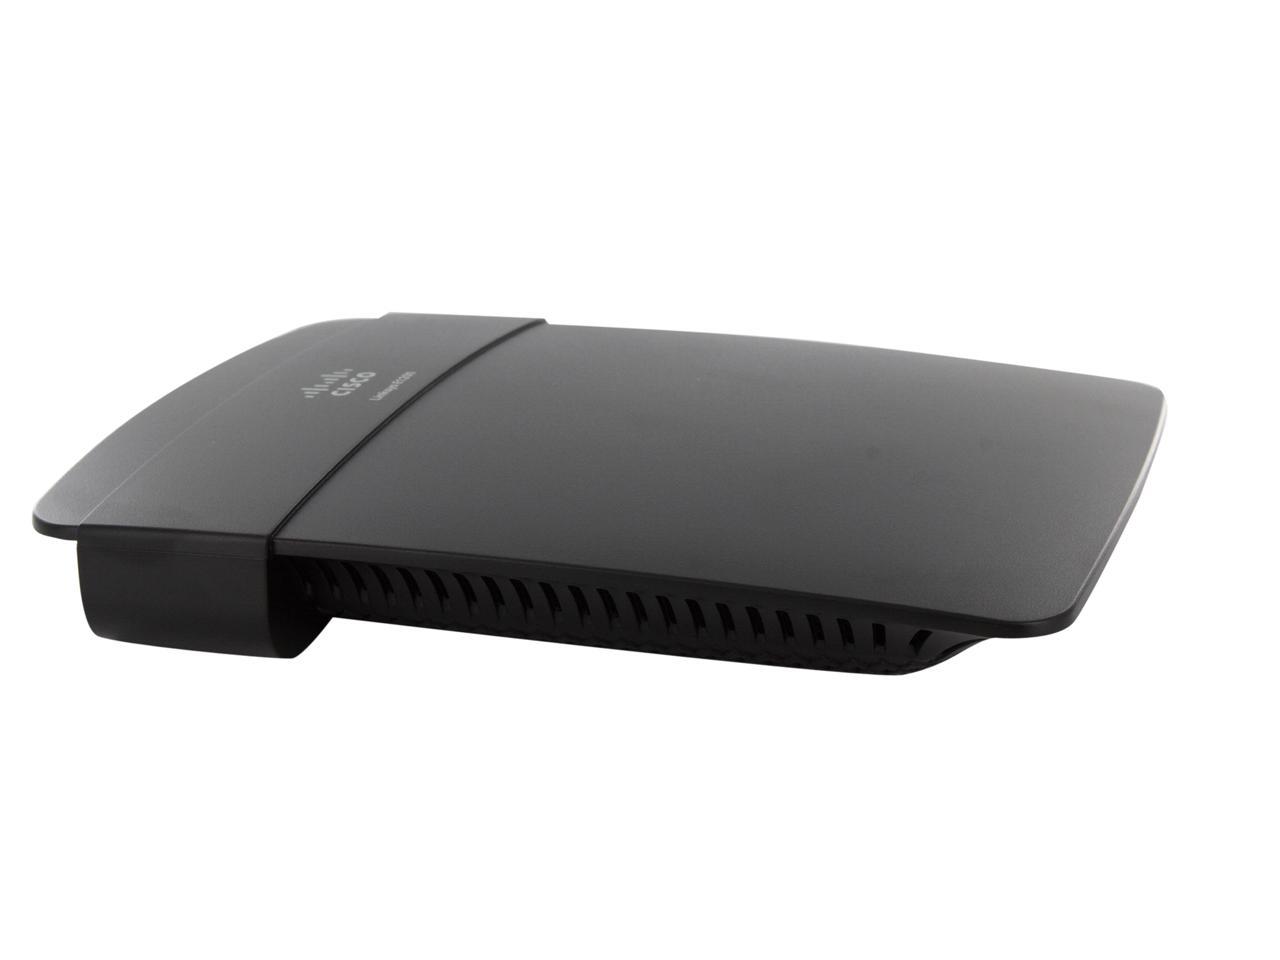 Linksys N300 Wi-Fi Wireless Router with Linksys Connect Including Parental Controls & Advanced Settings E1200 